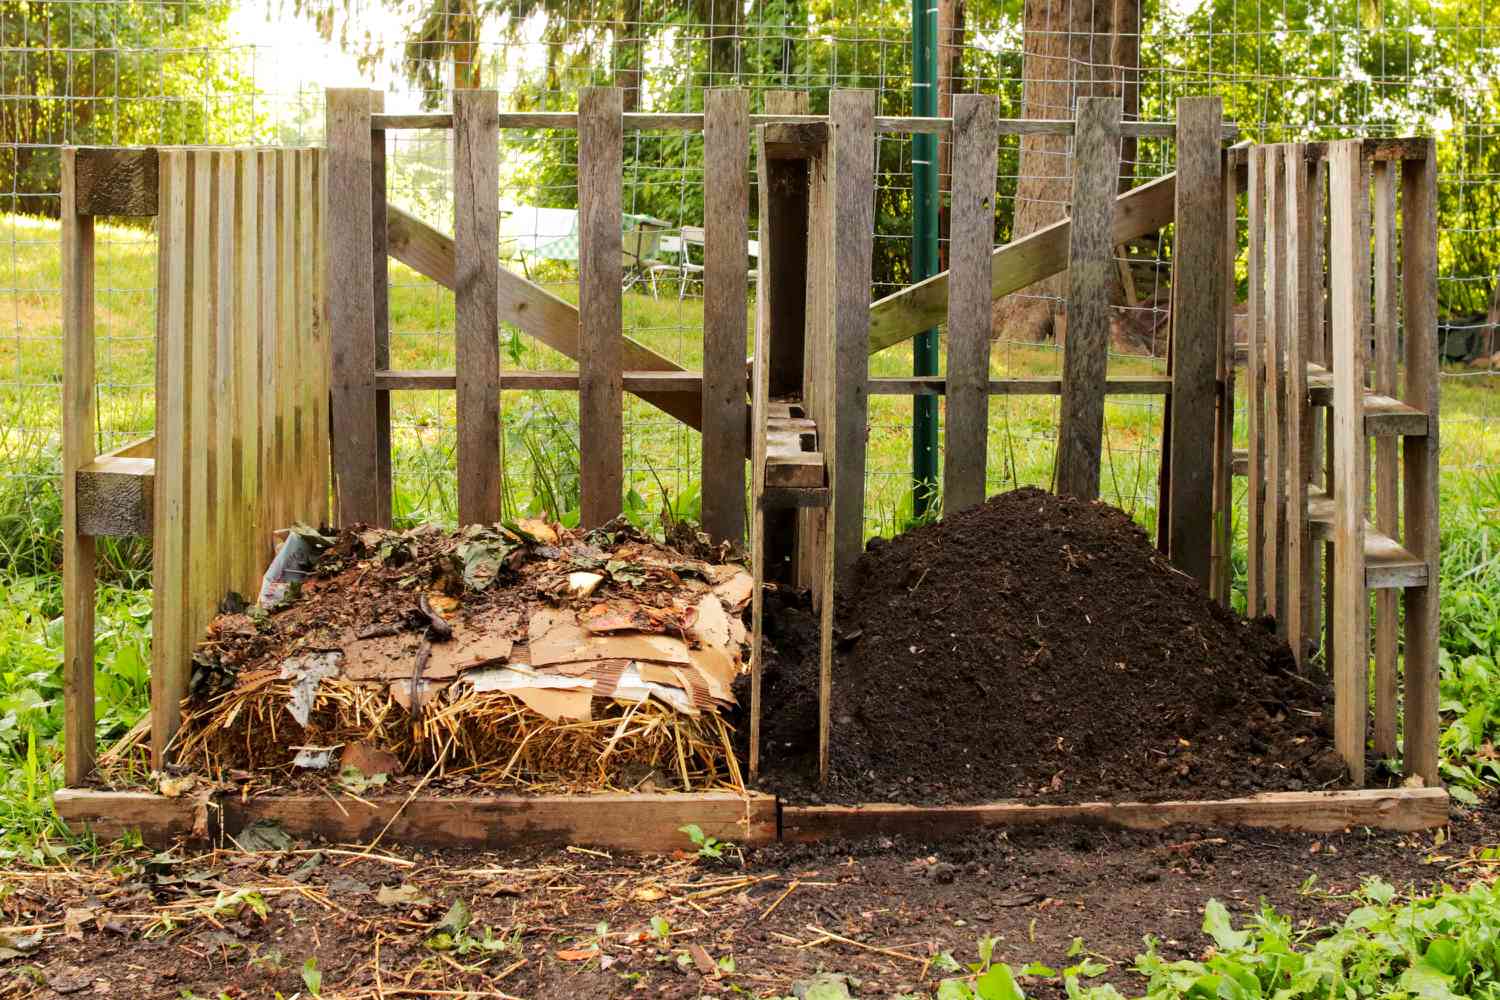 Wooden bin separated with organic and dried materials next to fresh compost